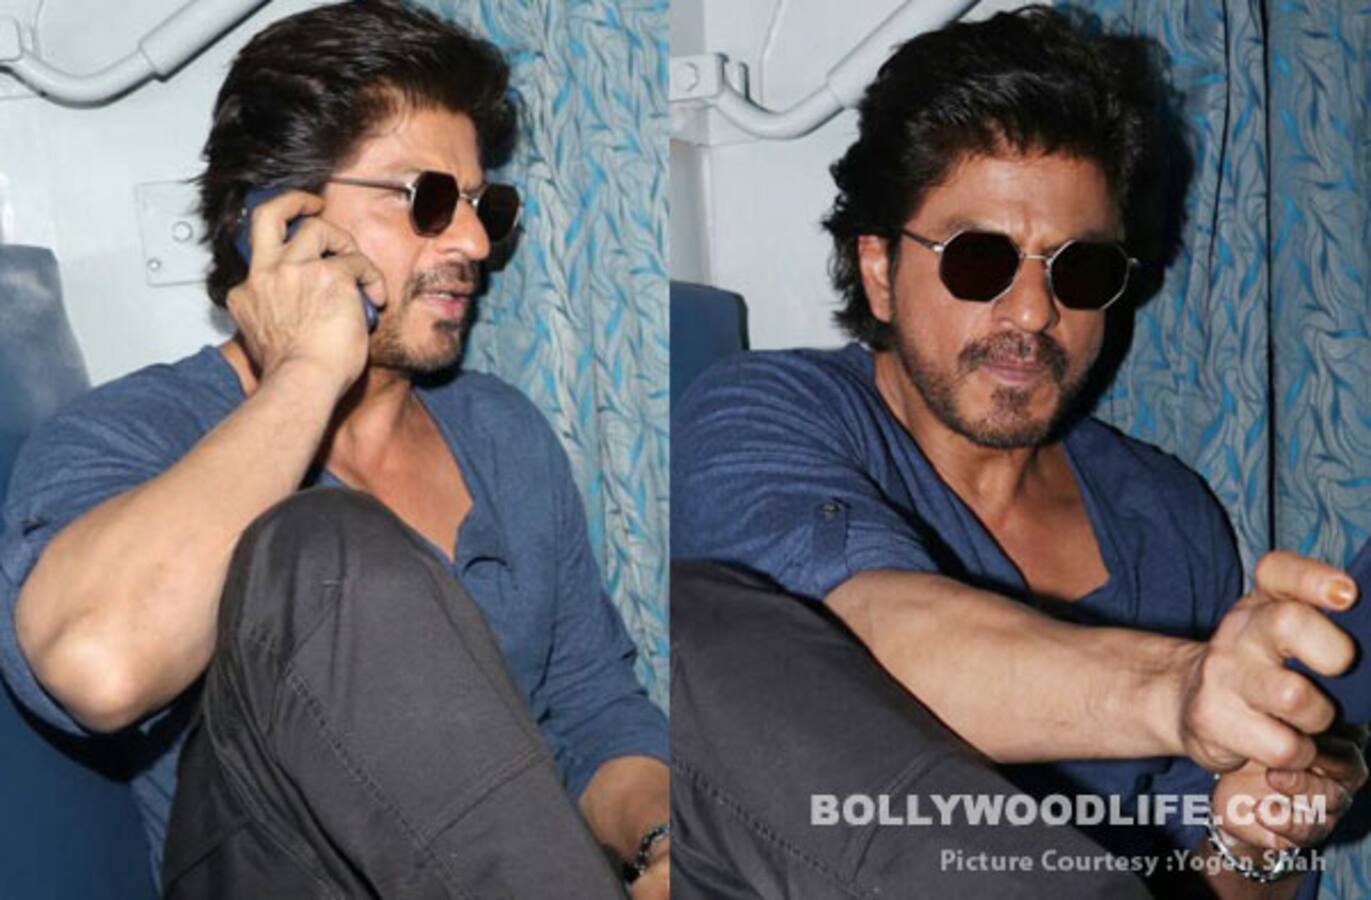 Shah Rukh Khan promotes Raees on a train from Mumbai to Delhi - view inside  pics - Bollywood News & Gossip, Movie Reviews, Trailers & Videos at  